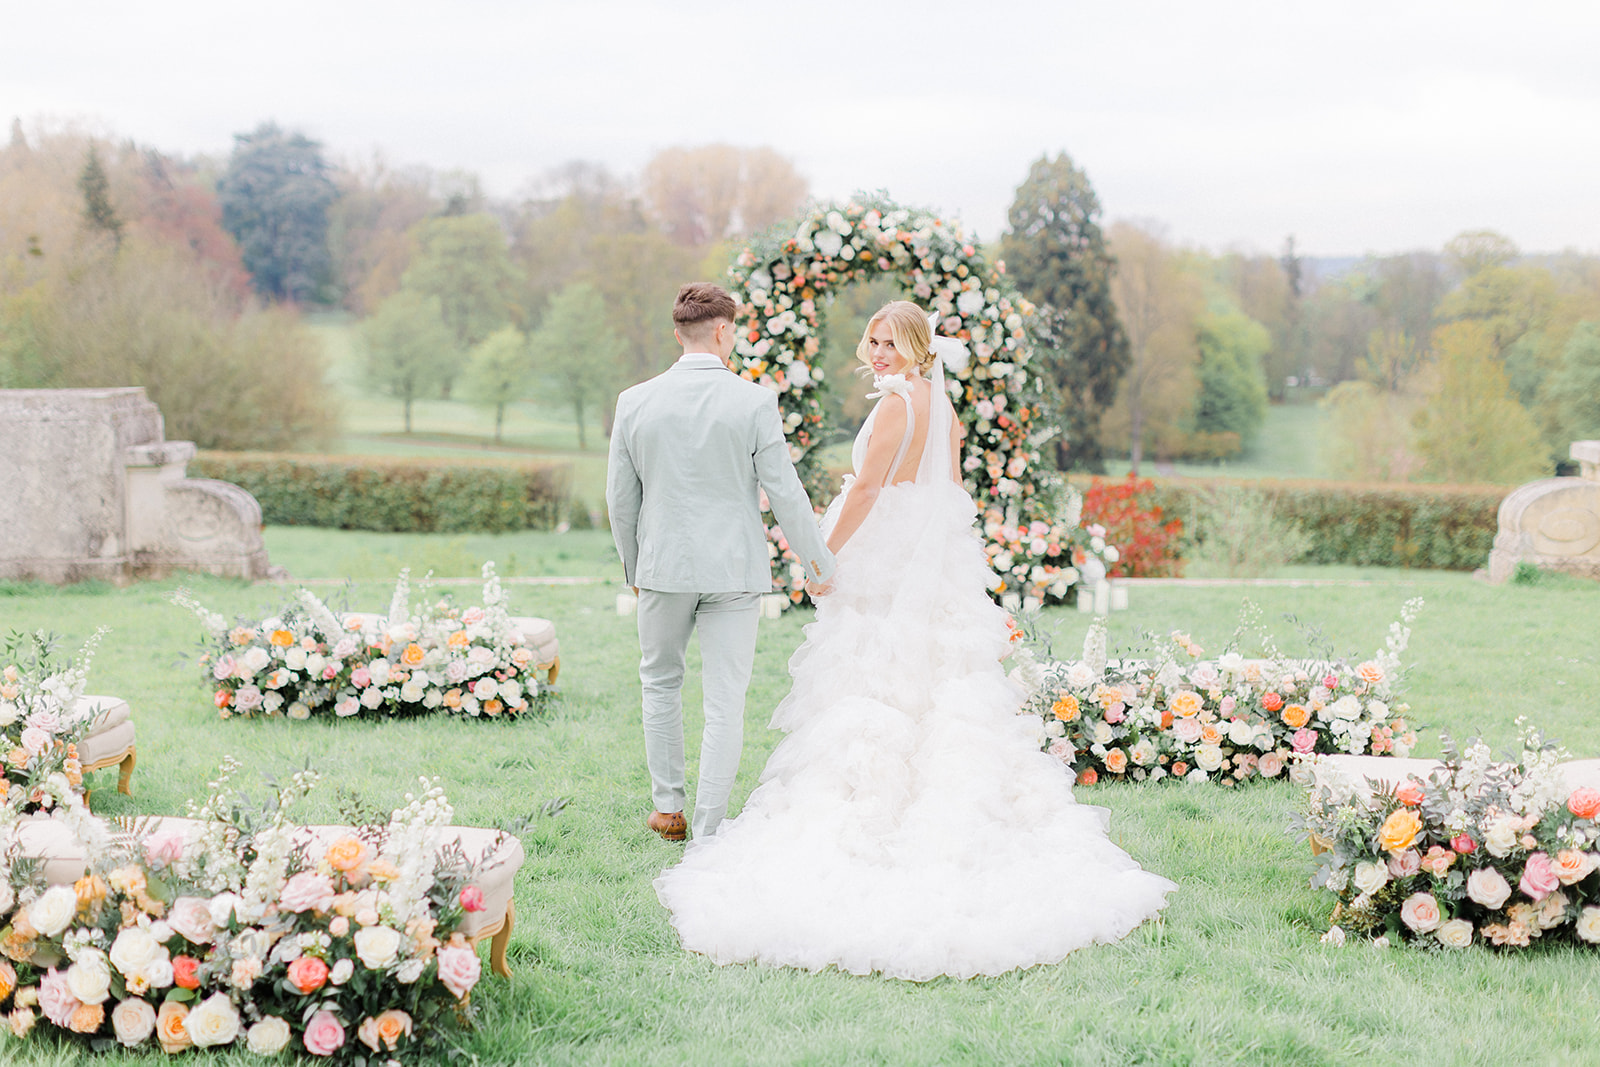 Peach Fuzz Pantone Colour of the Year Wedding flowers luxury florist Flourish and Grace photography by Natalie Stevenson in Paris at Chateau Bouffemont. Flower ceremony arch on lawn